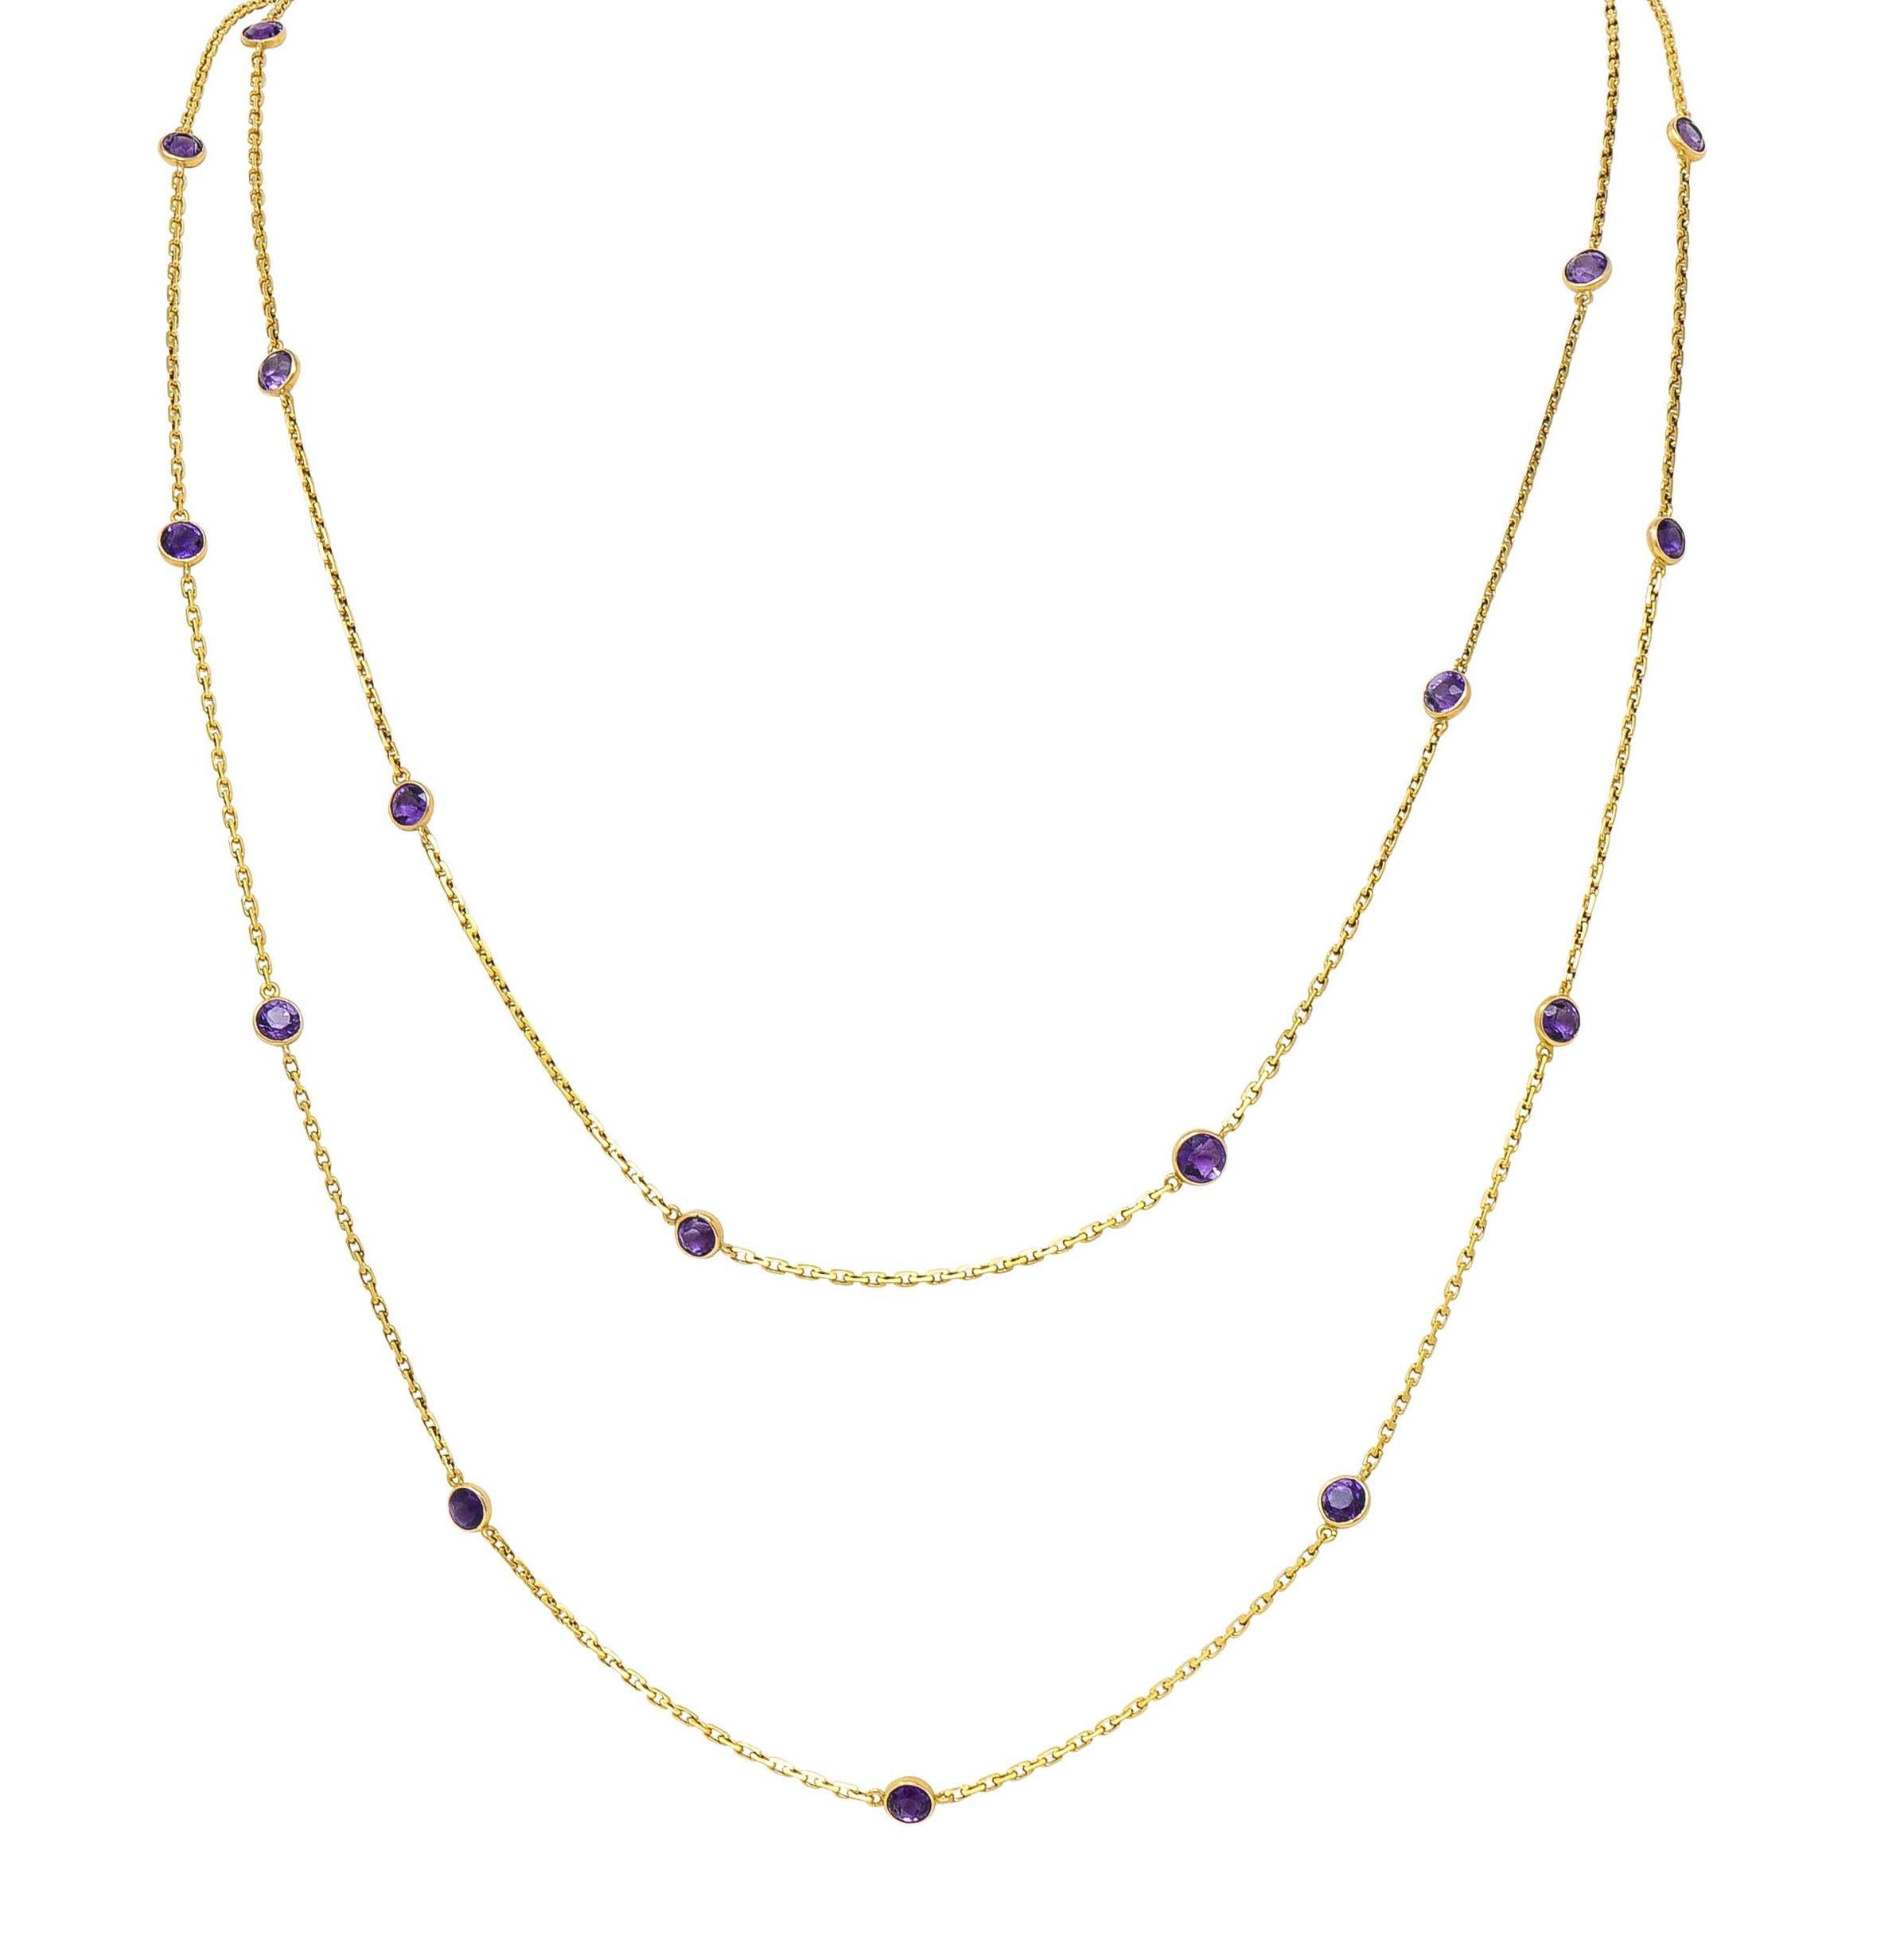 Victorian Amethyst 18K Yellow Gold 59 IN Long Antique Station Chain Necklace For Sale 4